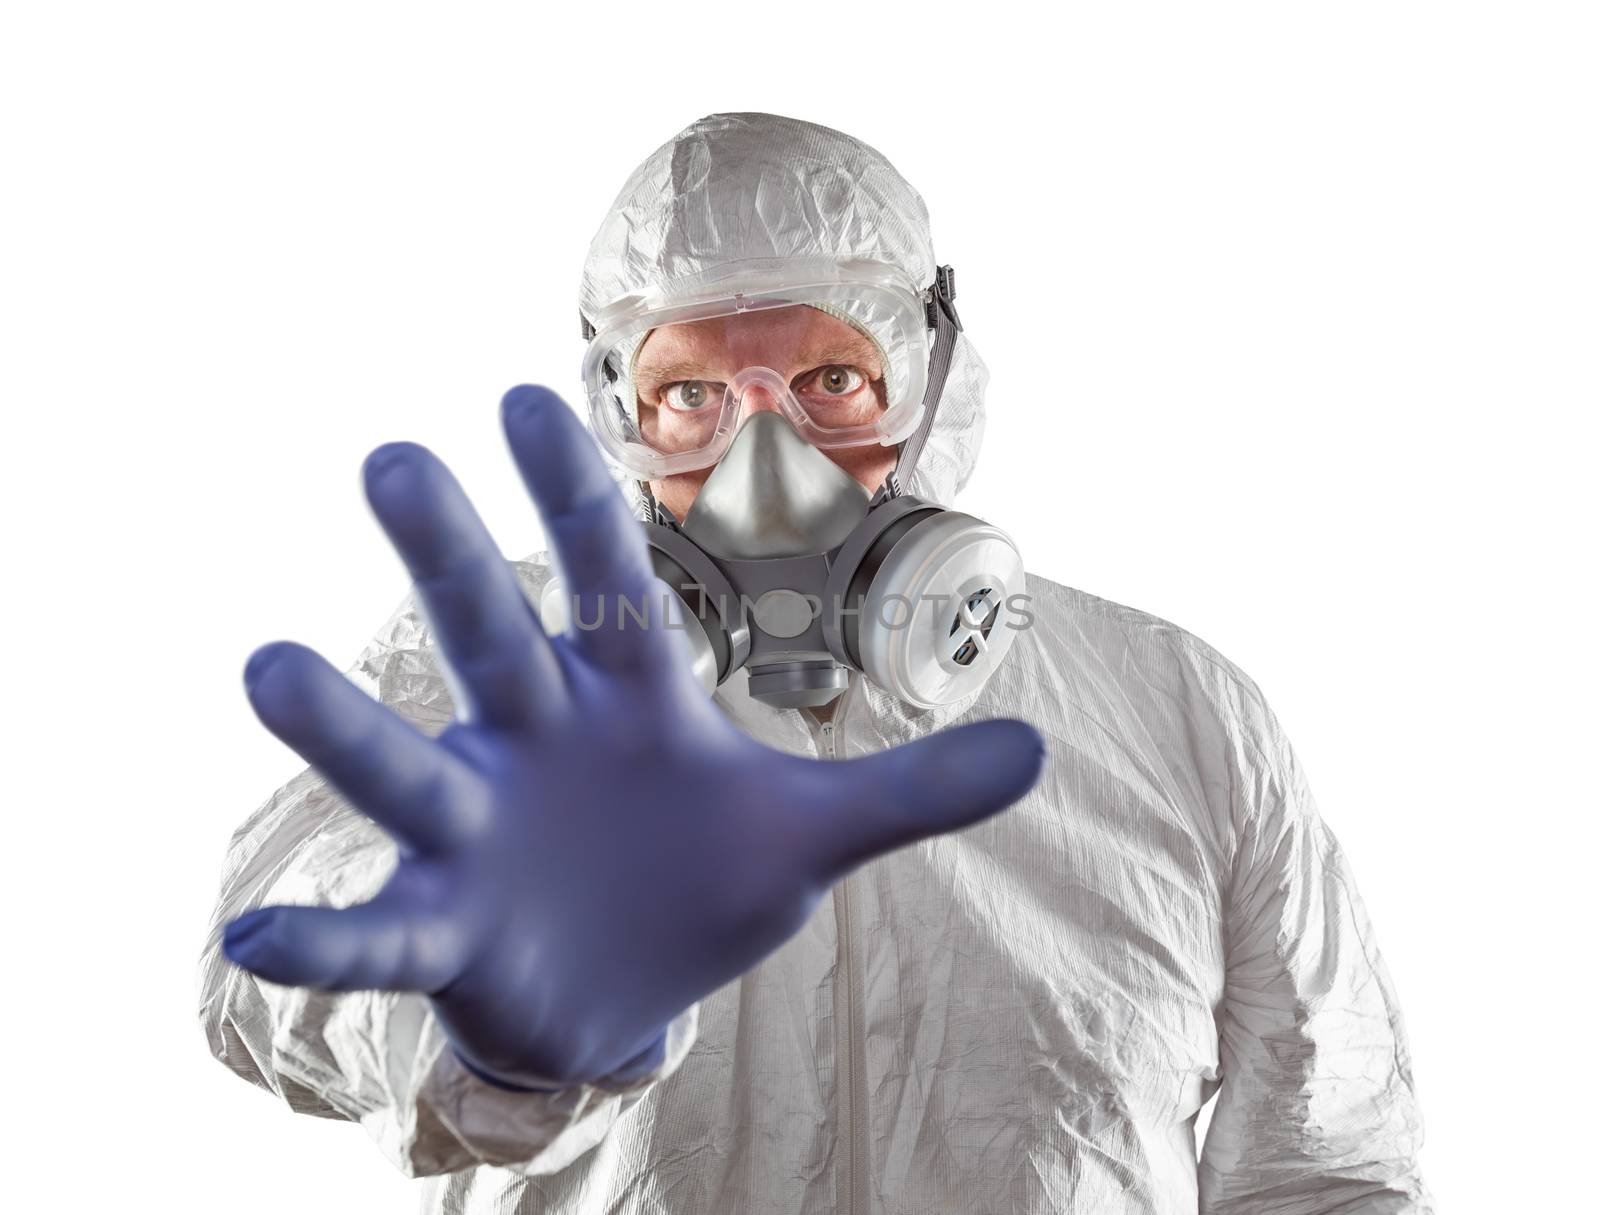 Man Wearing Hazmat Suit, Protective Gas Mask and Goggles Reaching Out With Hand Isolated On White.